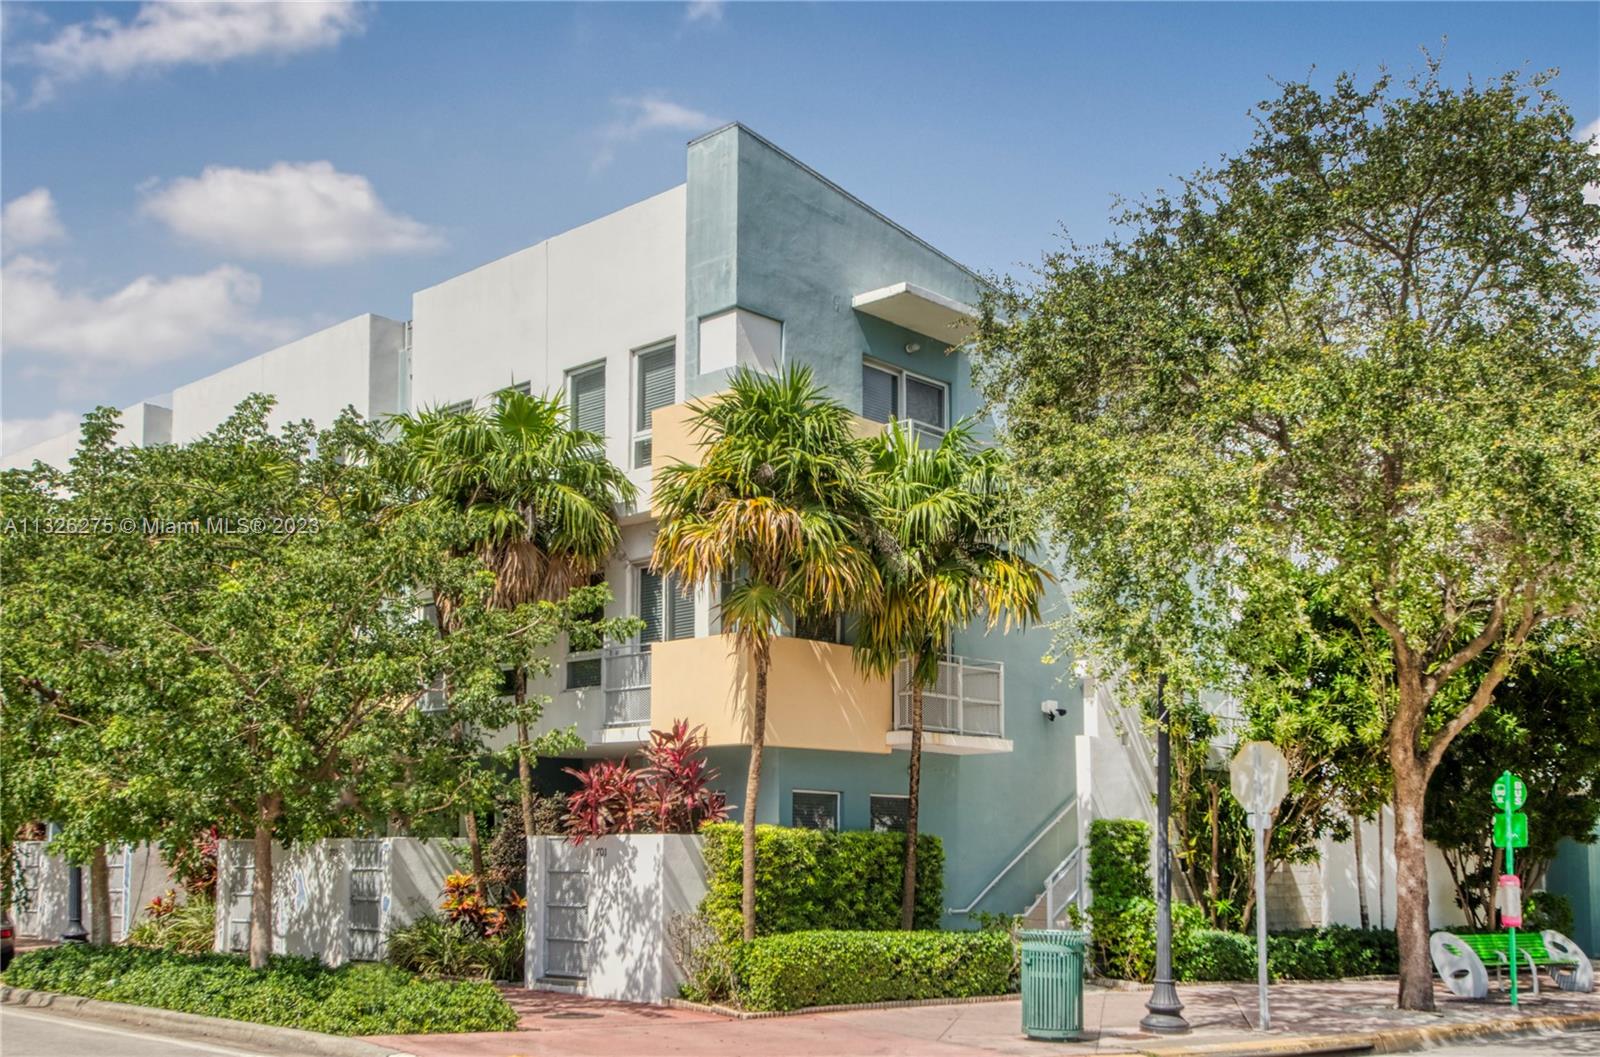 Incredible Price Point for a Contemporary 2 bedroom Townhouse South of Fifth. Two blocks from the ocean and all the fun SoBe has to offer. This very unique condo provides a private lifestyle you don't find in a highrise. Features include a modern kitchen with stainless steel appliances, contemporary baths, marble flooring throughout, custom closets, and new window treatments. Plus, gated entrance, attached garage parking with storage, new washer/dryer, and very low monthly dues. Easy to show!